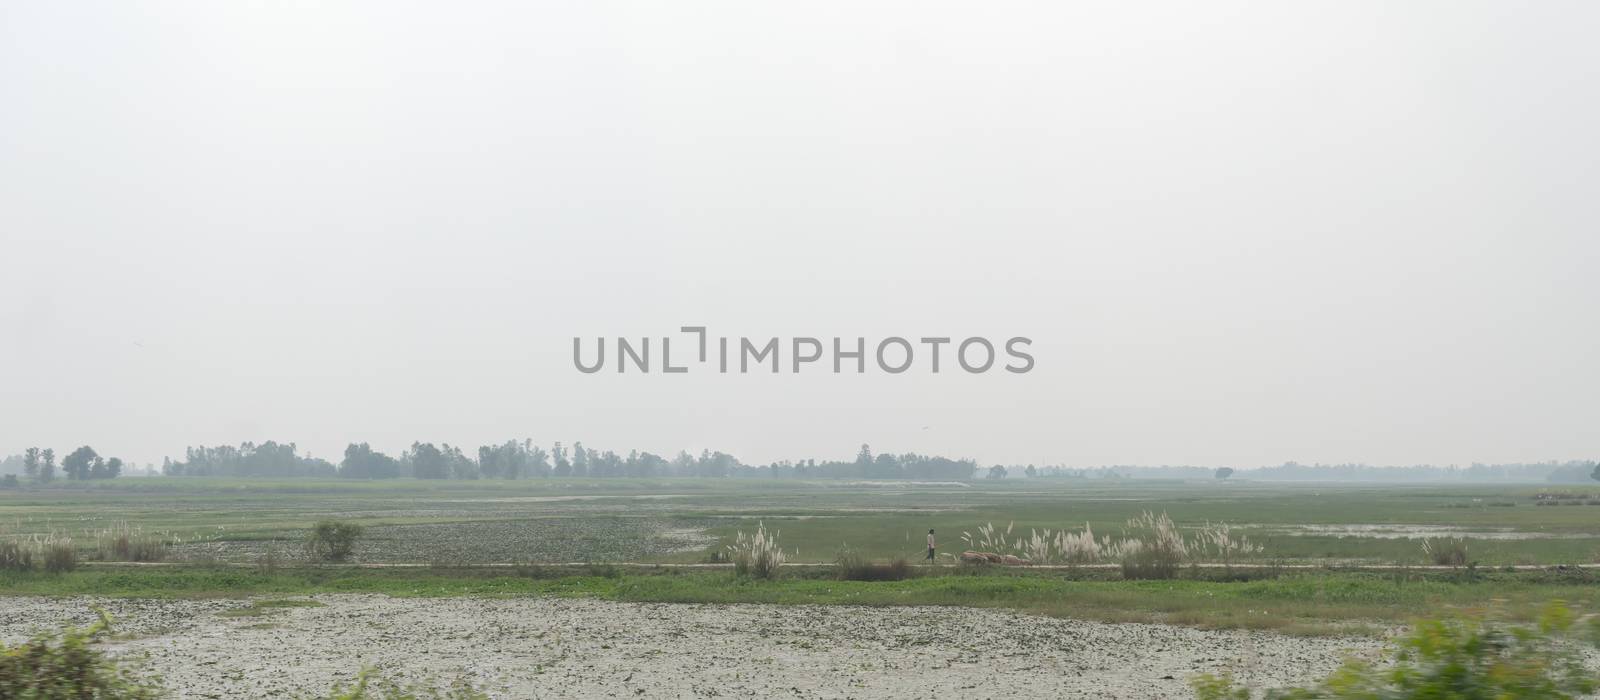 Landscape Horizon view of a model rural Indian village area with farm land and agriculture field. India Travel Tourism background. Assam North East India, South Asia Pacific. by sudiptabhowmick